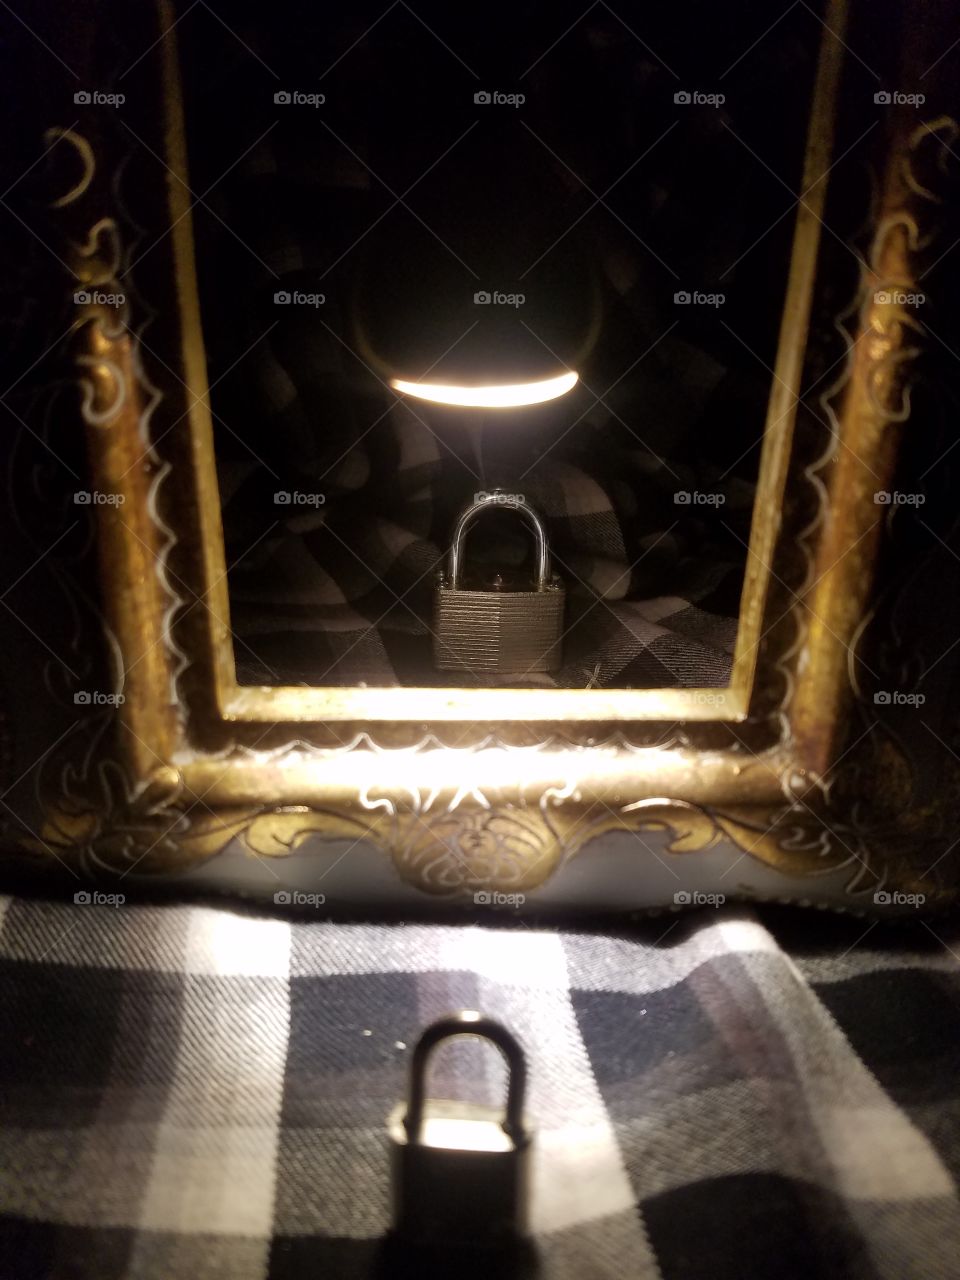 The smaller younger lock stares at its reflection that is larger and stronger.